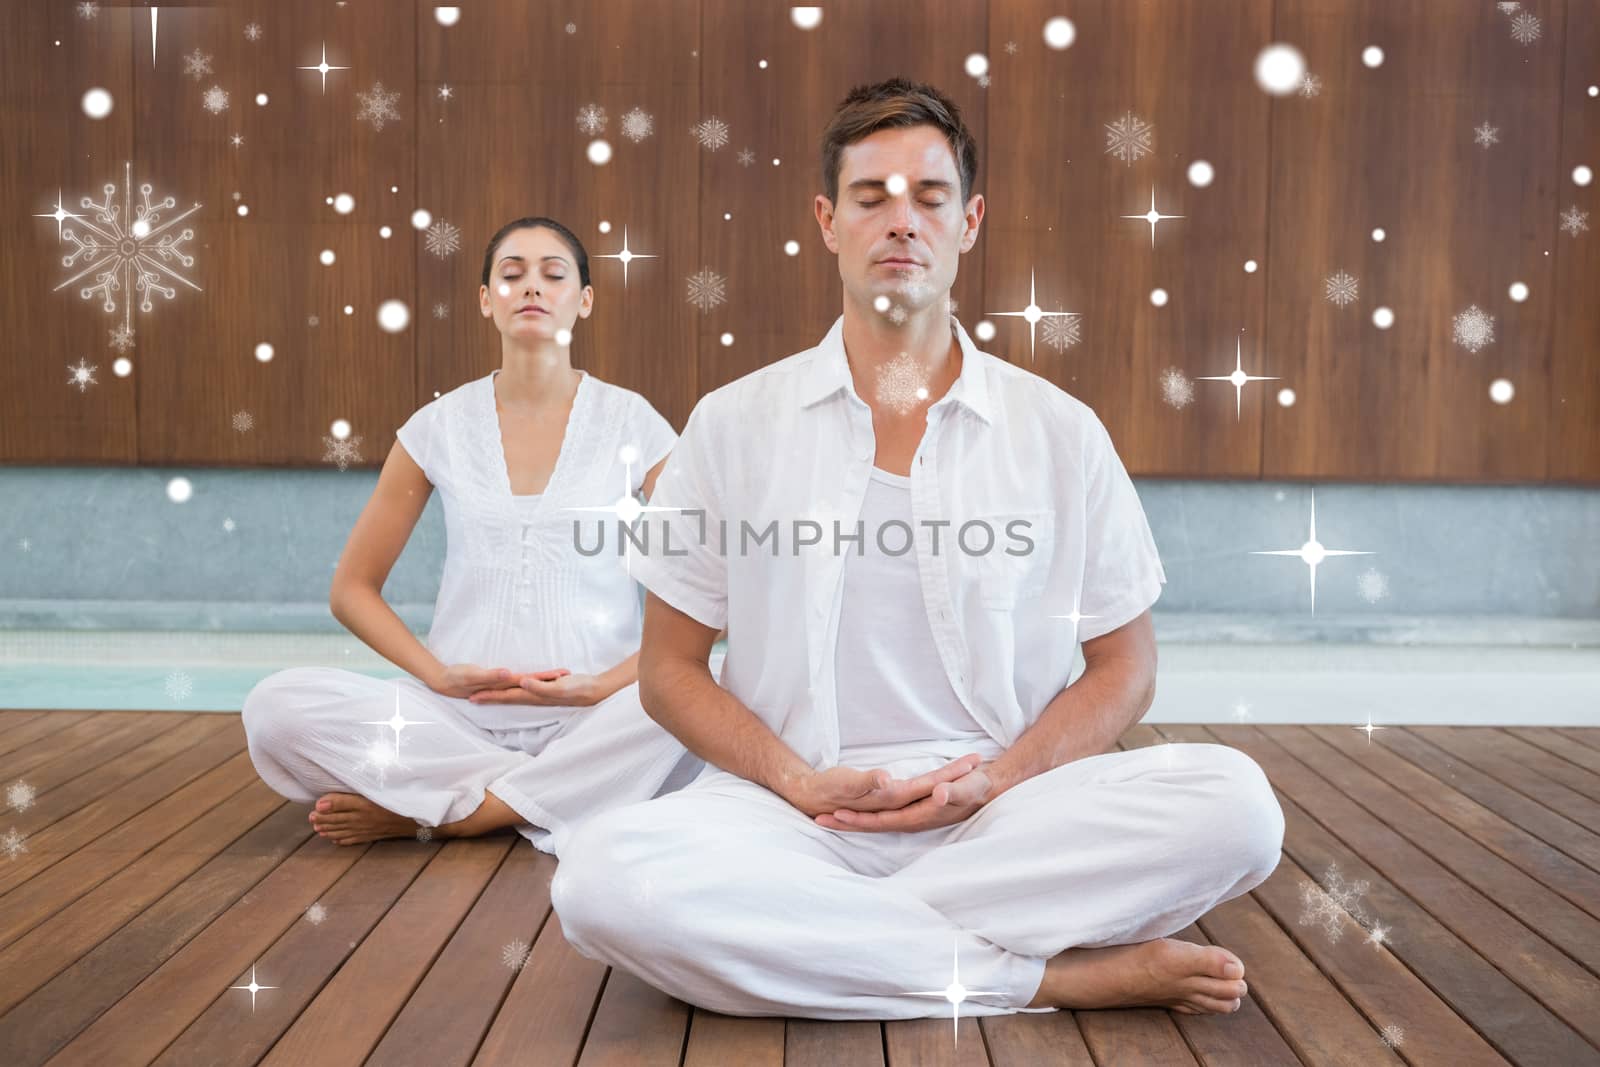 Peaceful couple in white sitting in lotus pose together against snow falling